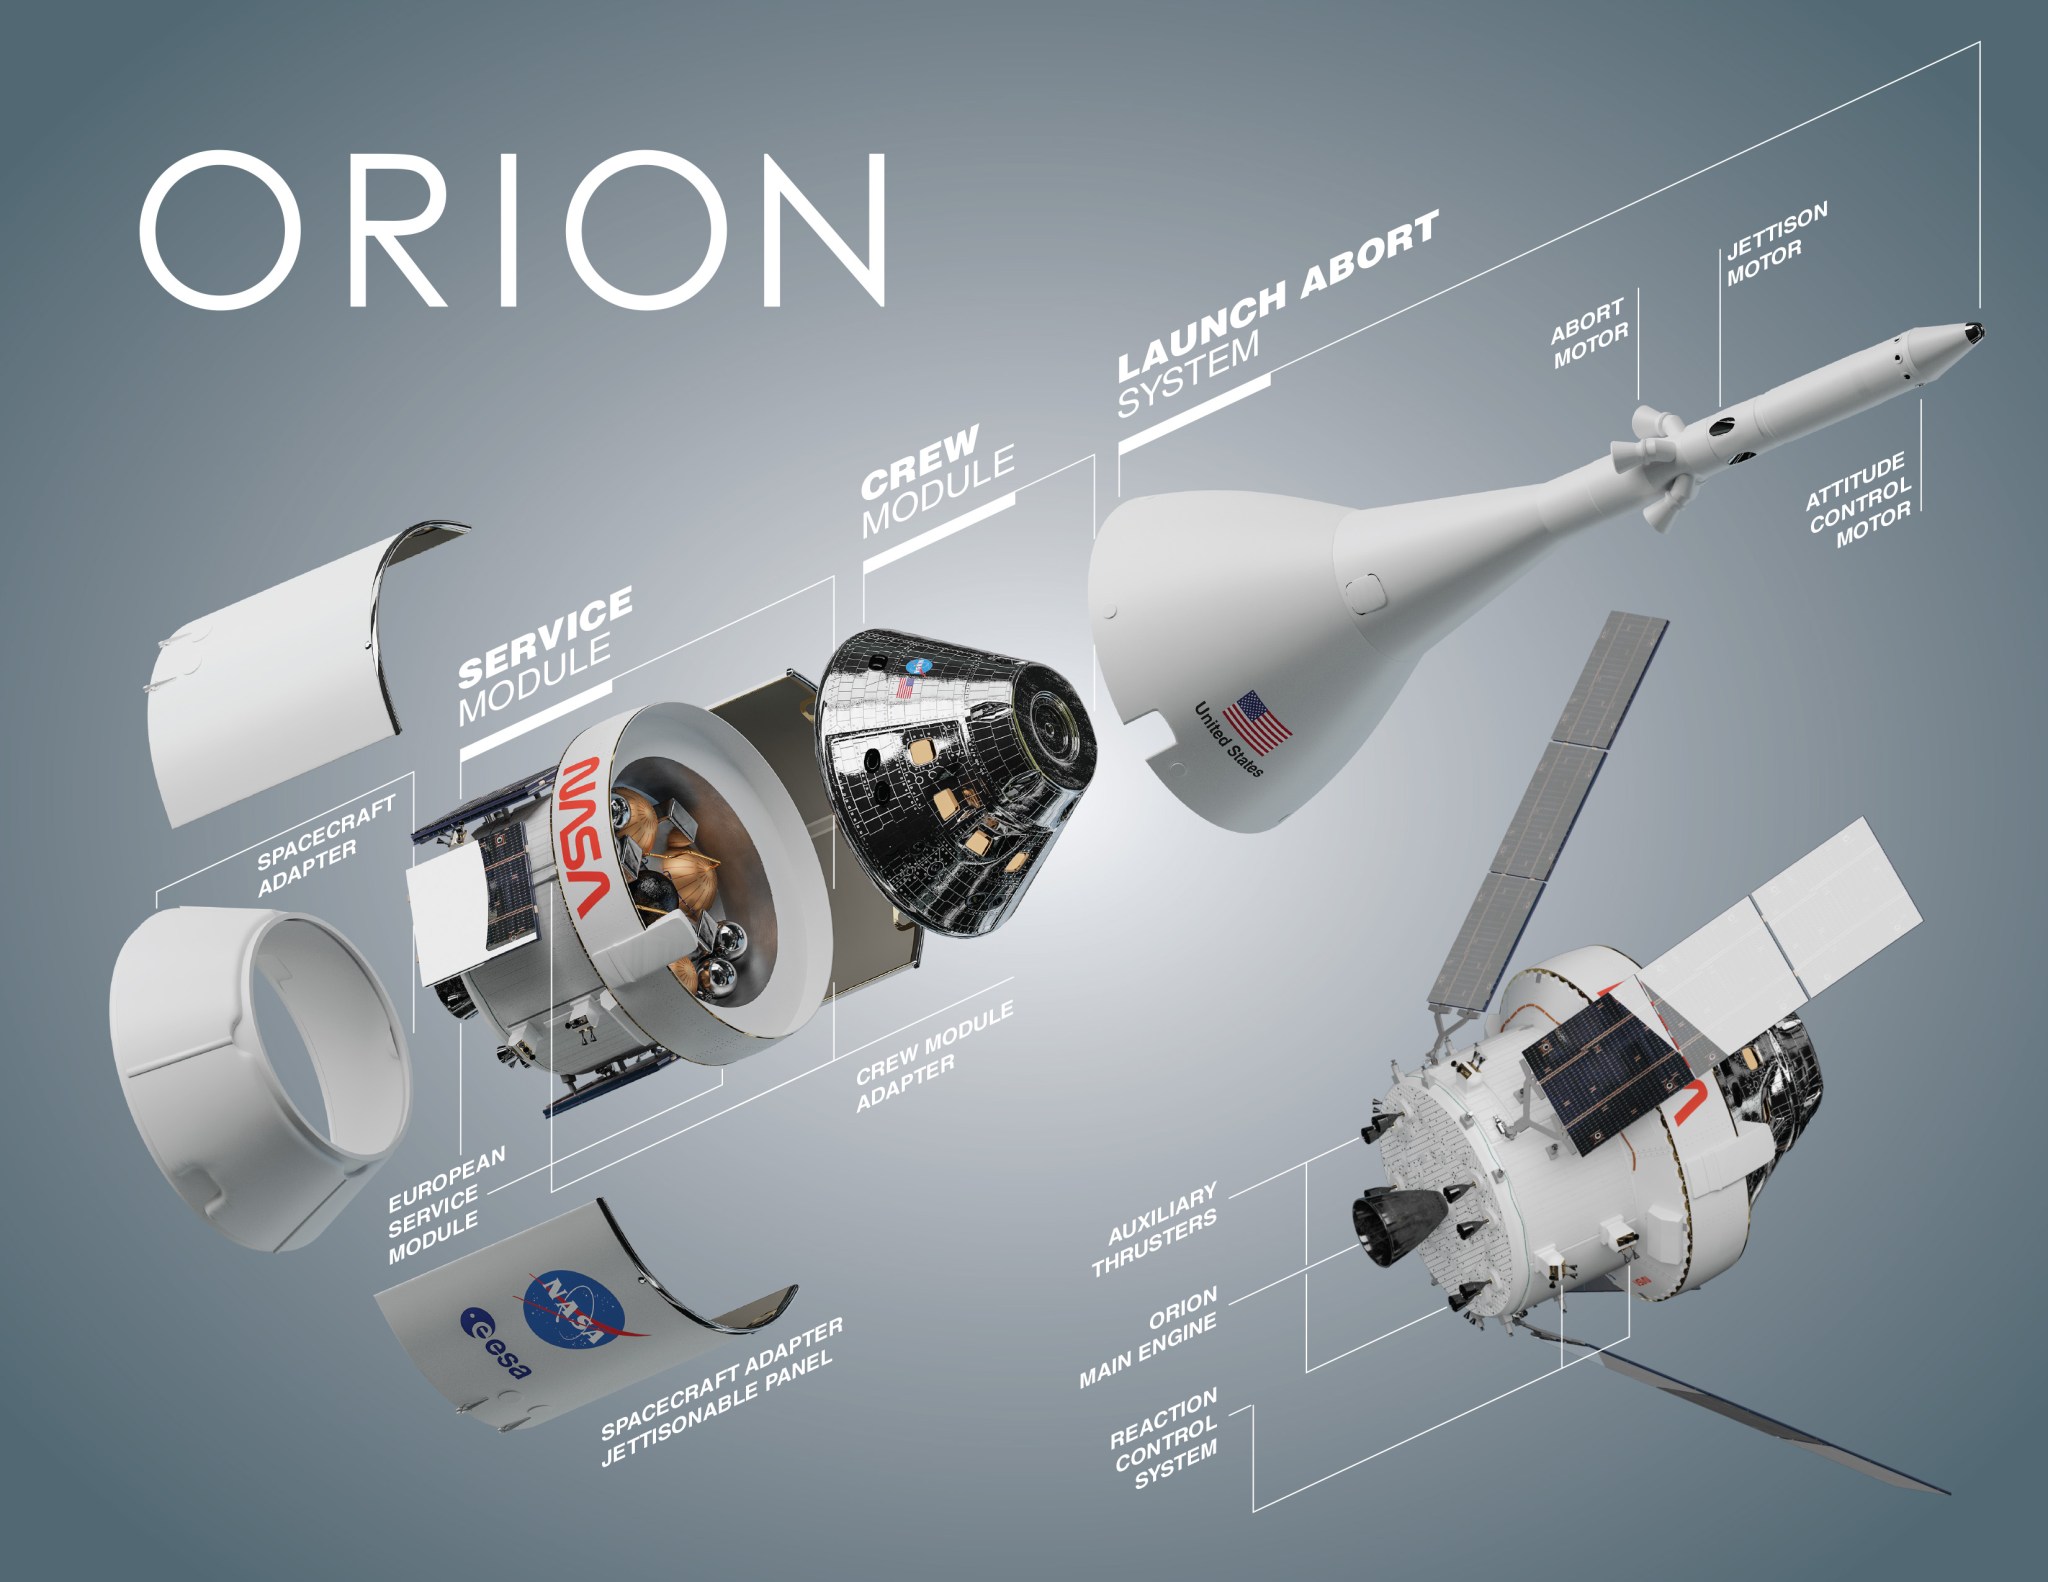 Graphic showing components of the Orion spacecraft